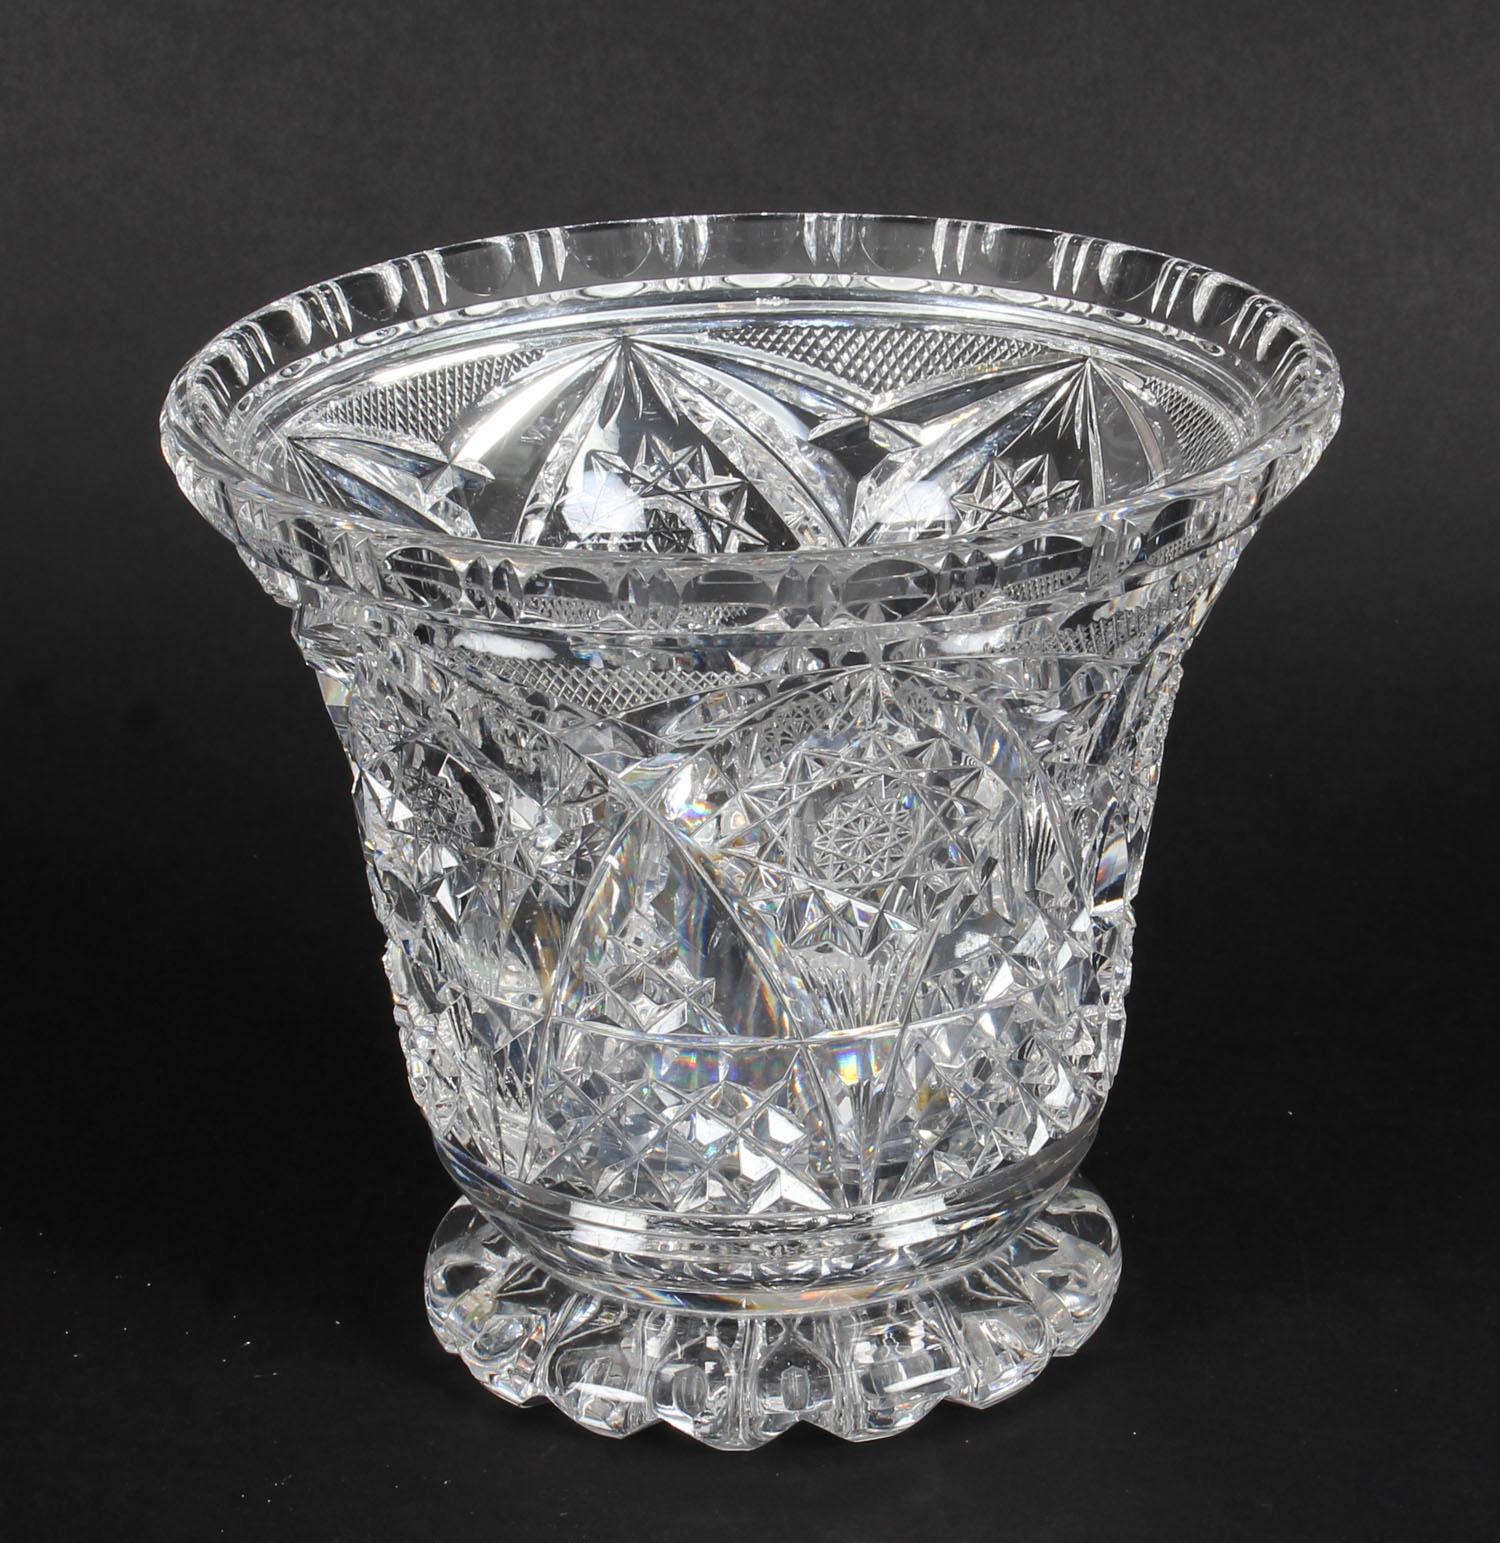 Vintage Cut Glass Crystal Glass Vase, Mid-20th Century For Sale 8